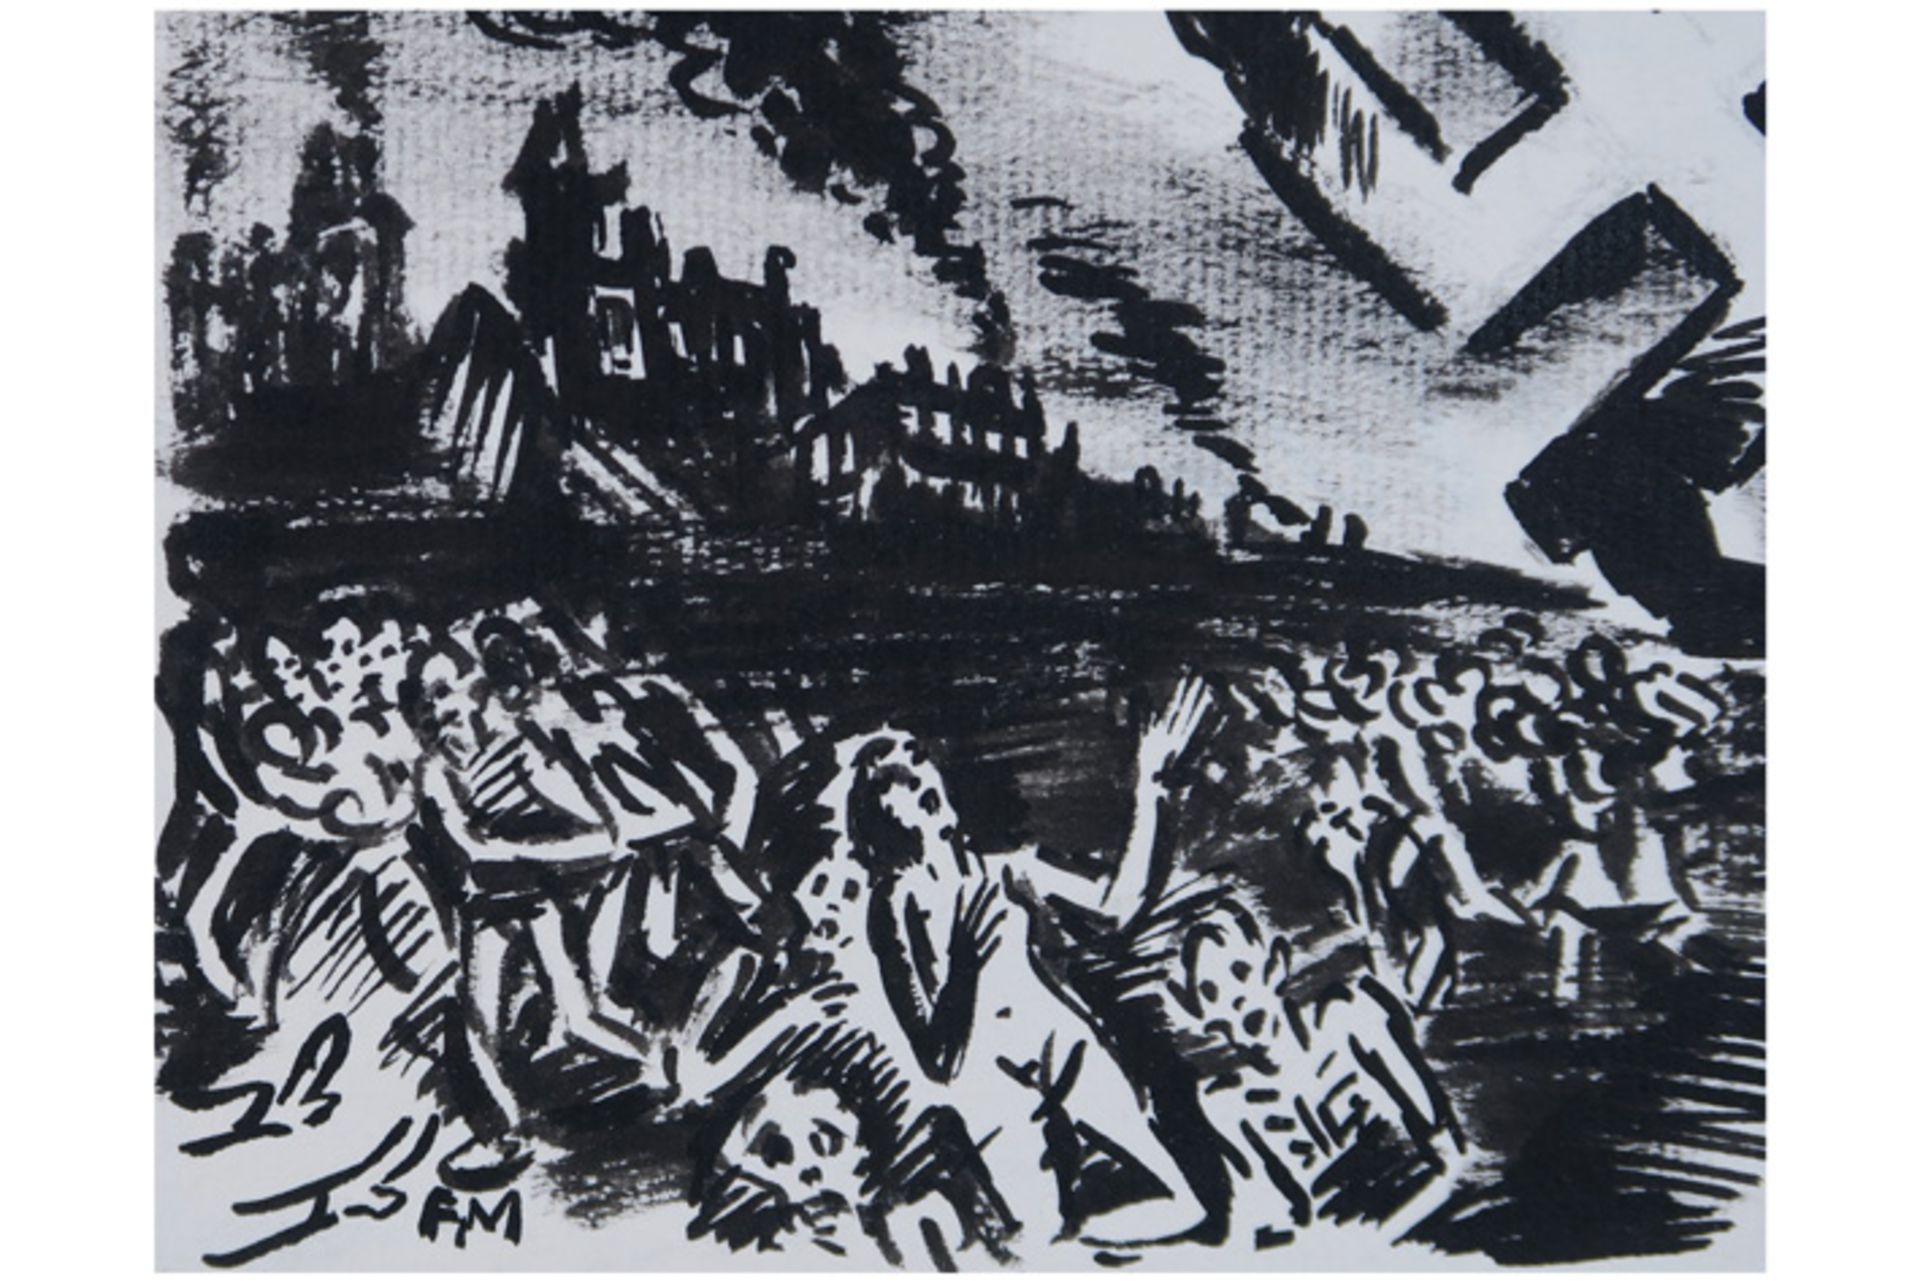 quite special Frans Masereel's "The occupier seen through his eyes" ink drawing to be dated 1940/ - Image 2 of 3